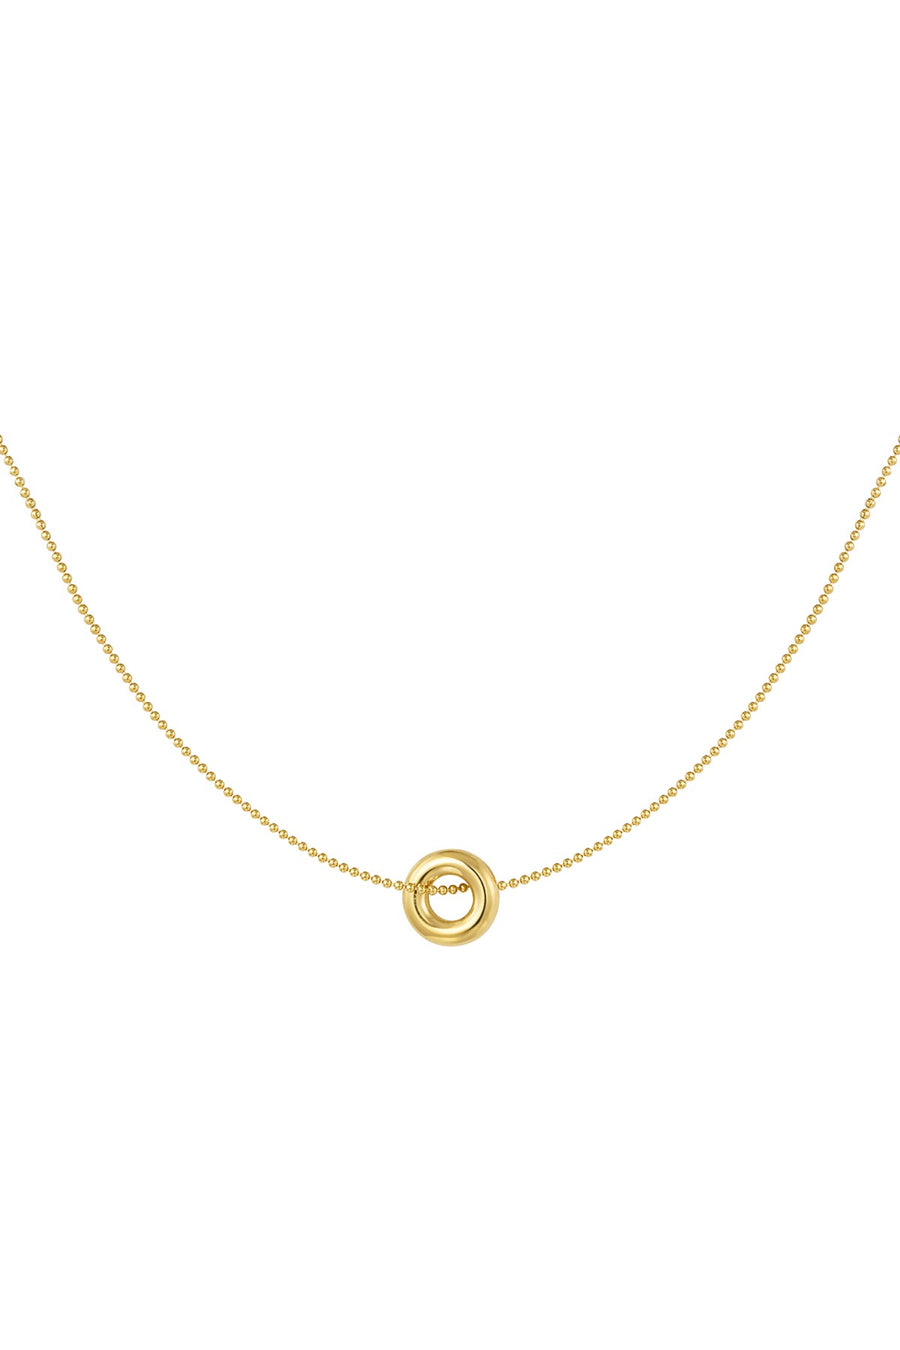 Circle Charm Necklace- Gold & Silver Available